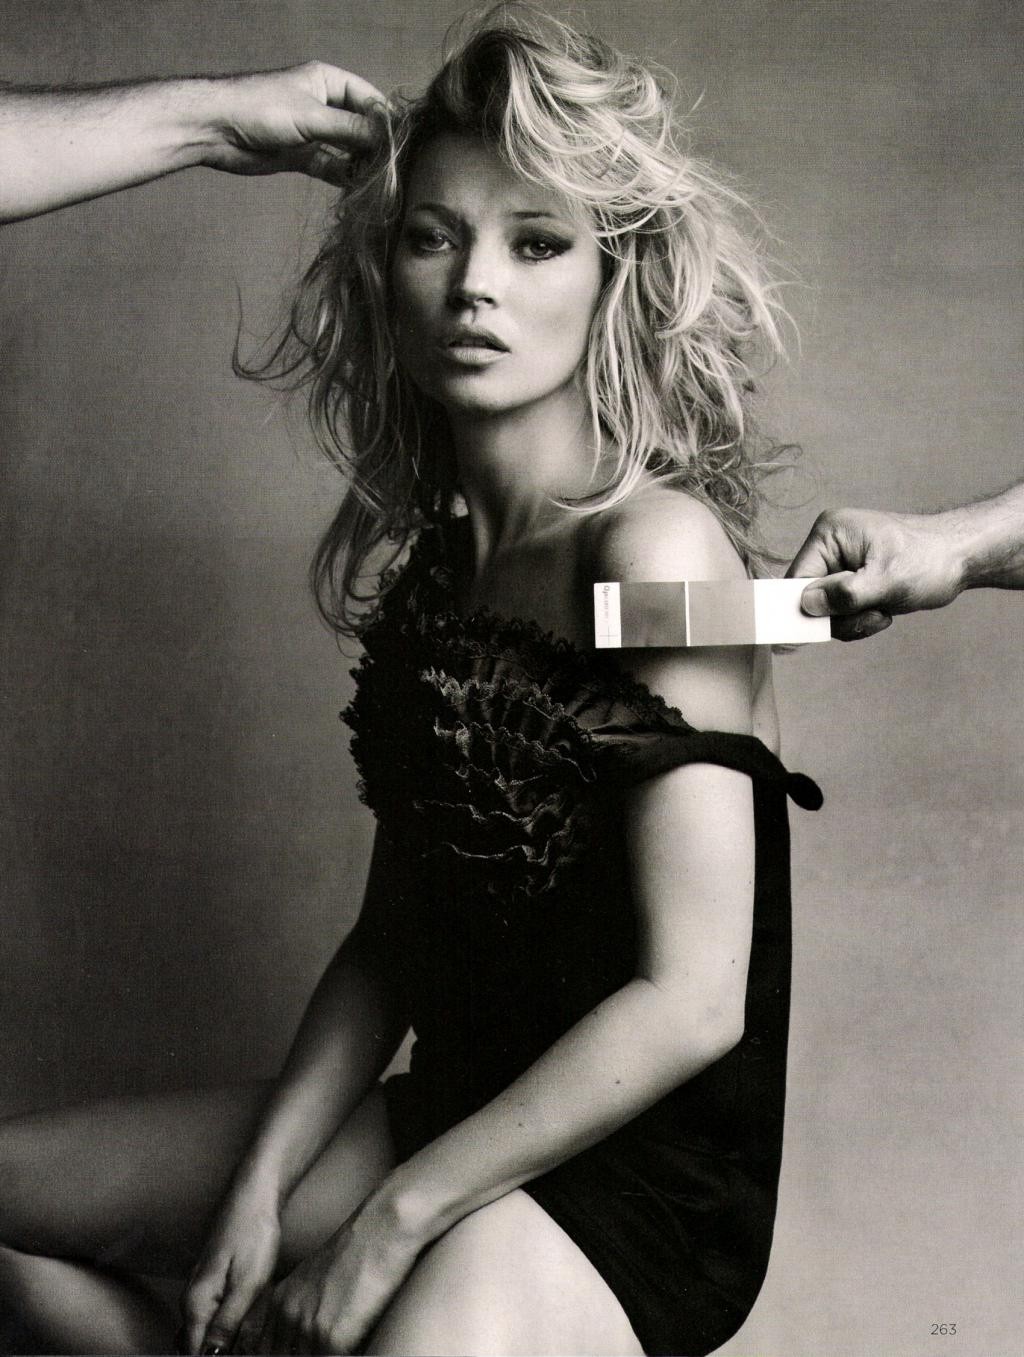 Kate Moss topless in 'God Save the Queen' photoshoot #75321438